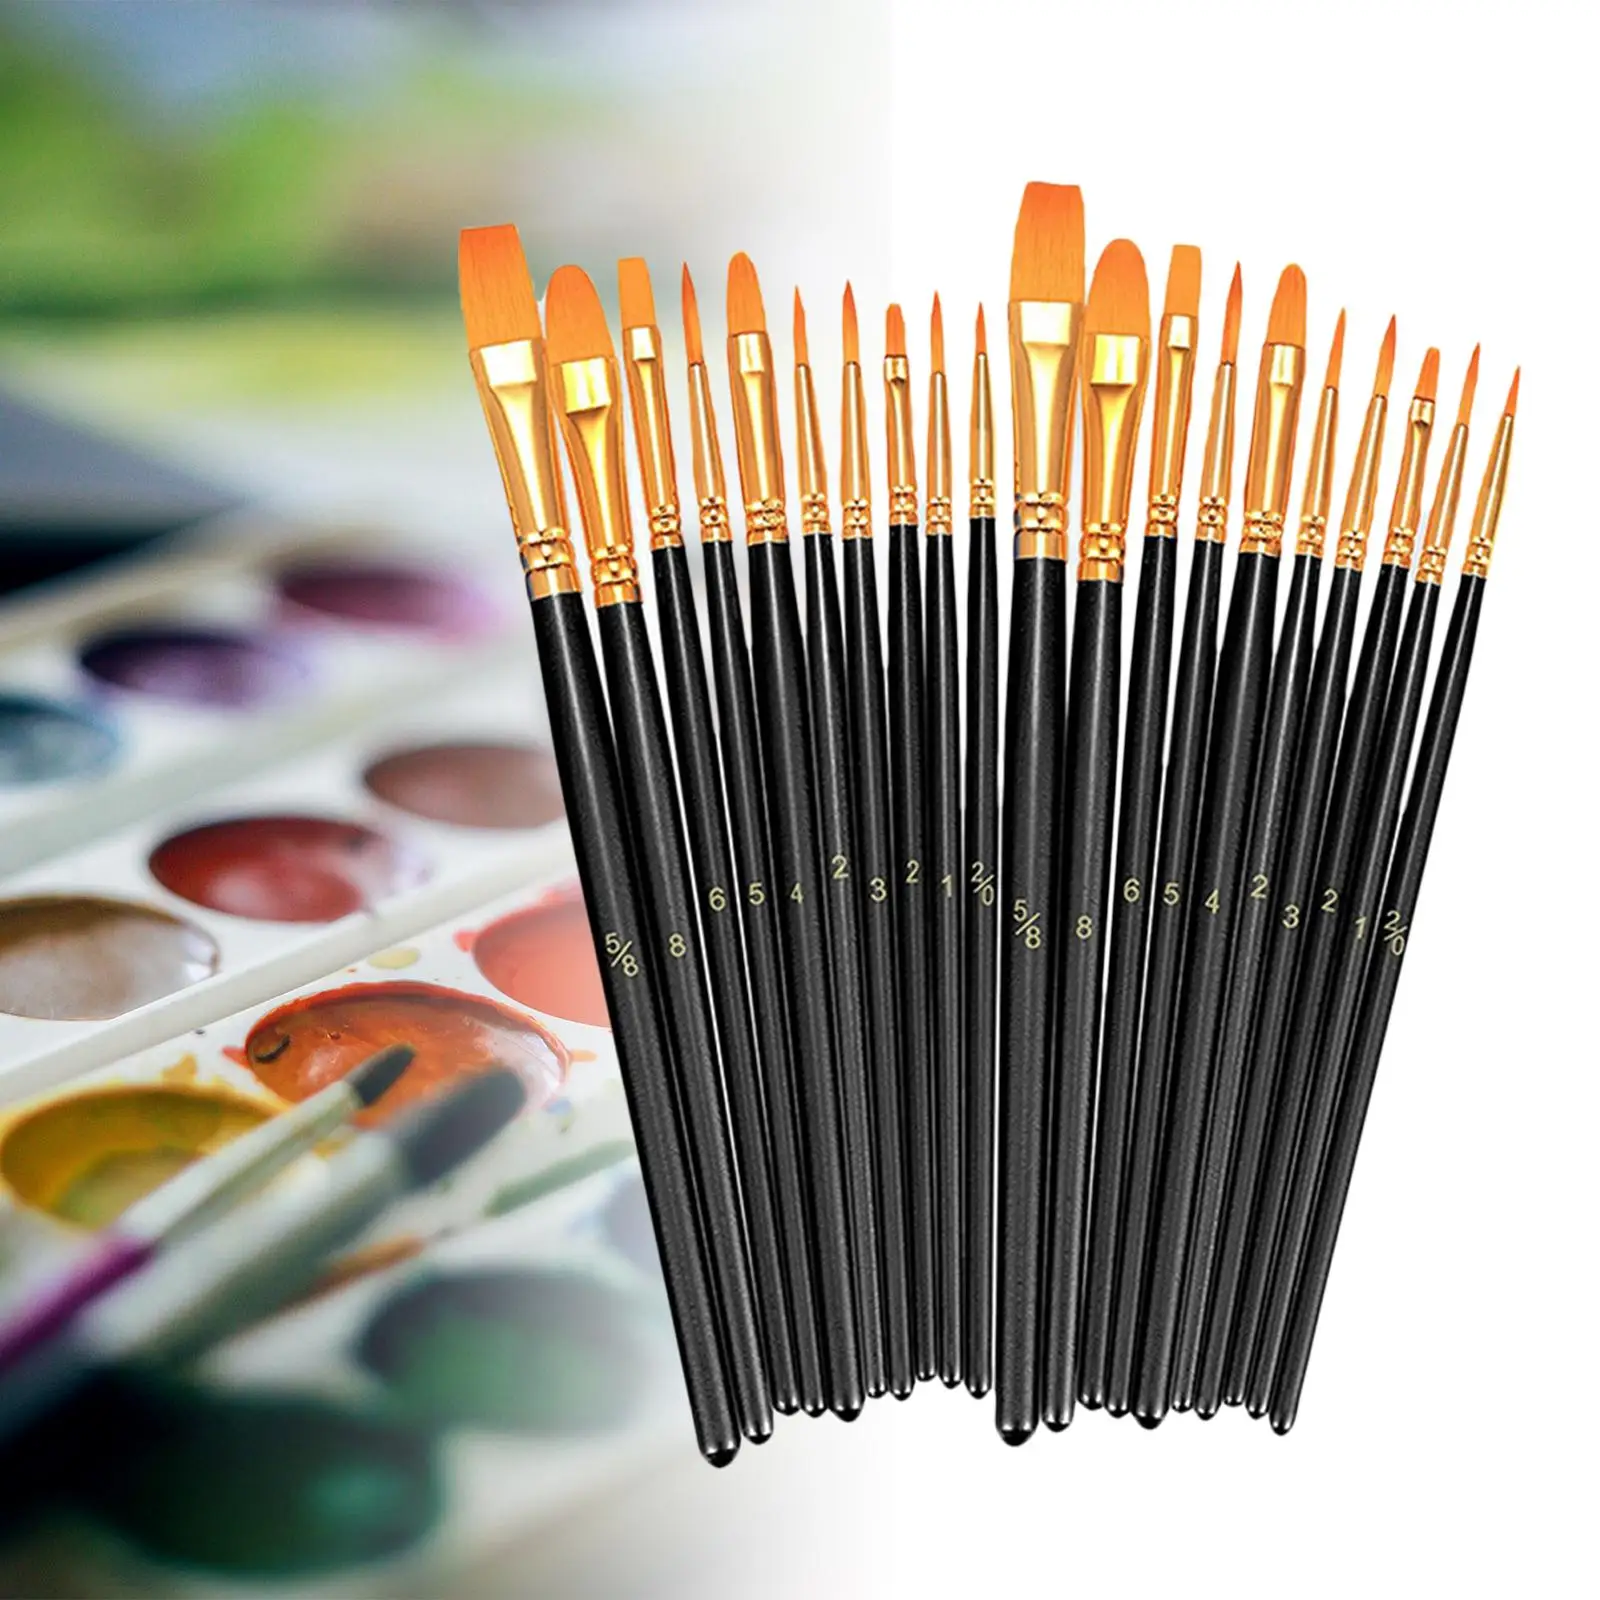 20x Paint Brush Set Gift for Artists Amateurs Portable Drawing Art Supplies for Gouache Miniature Detailing Oil Acrylic Painting